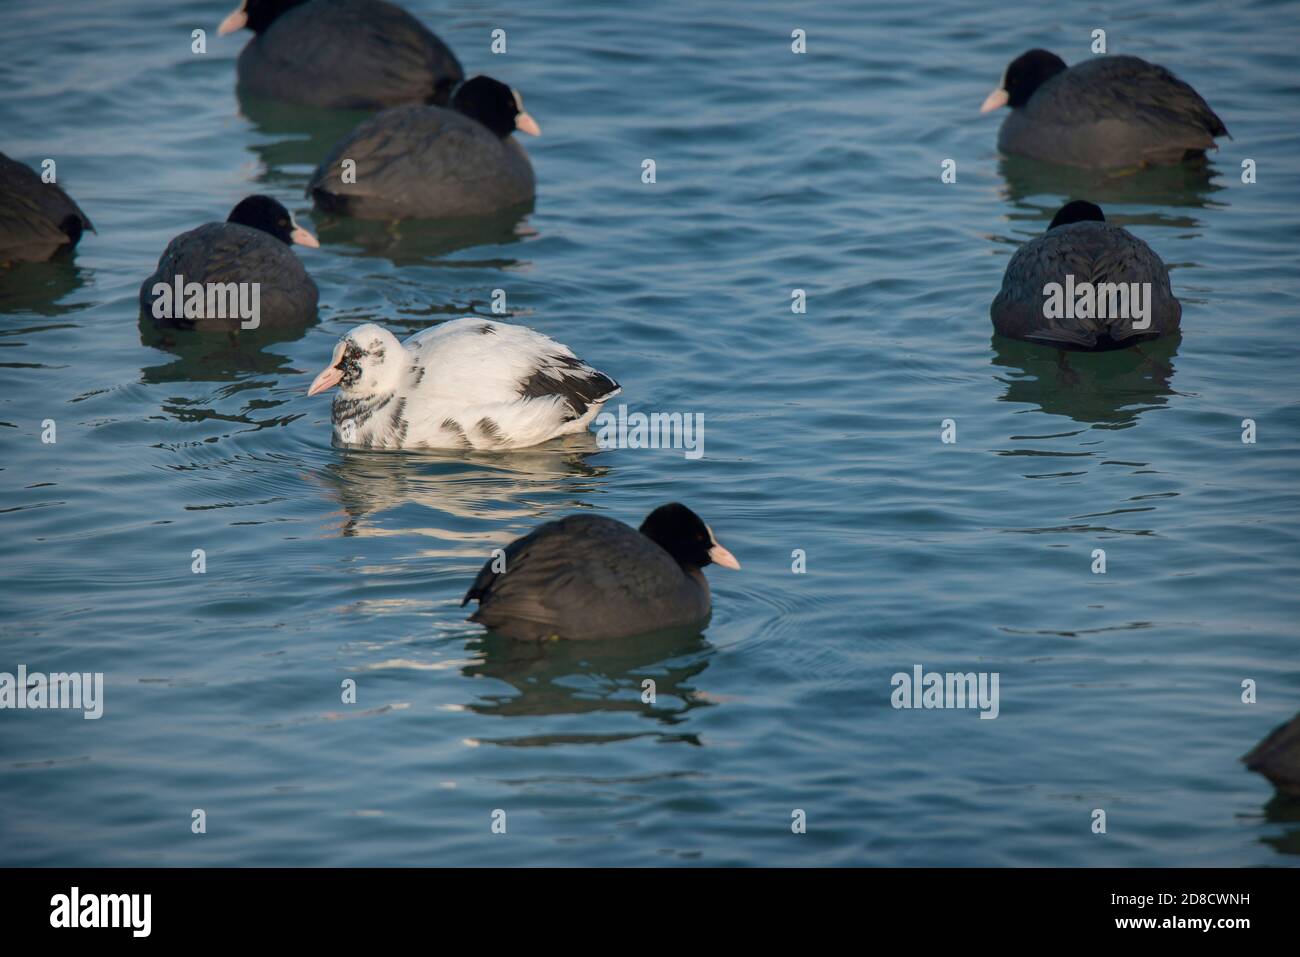 black coot (Fulica atra), leucistic black coot swimming amid other black coots, side view, Germany, Bavaria, Vogelfreistaette Mittlere Isarstauseen Stock Photo